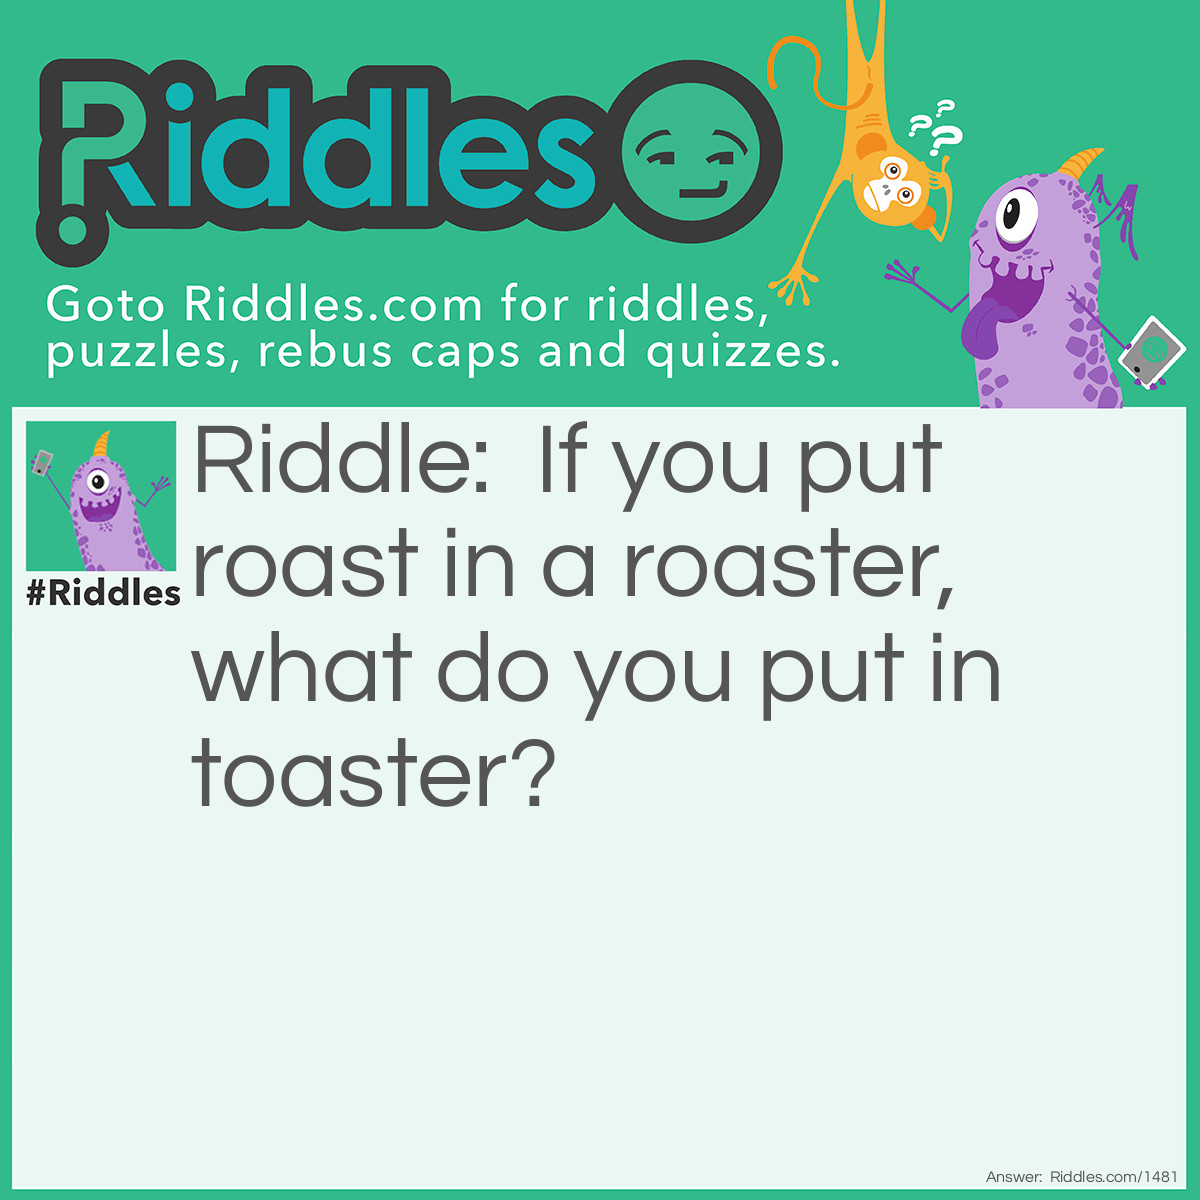 Riddle: If you put roast in a roaster, what do you put in toaster? Answer: Bread.